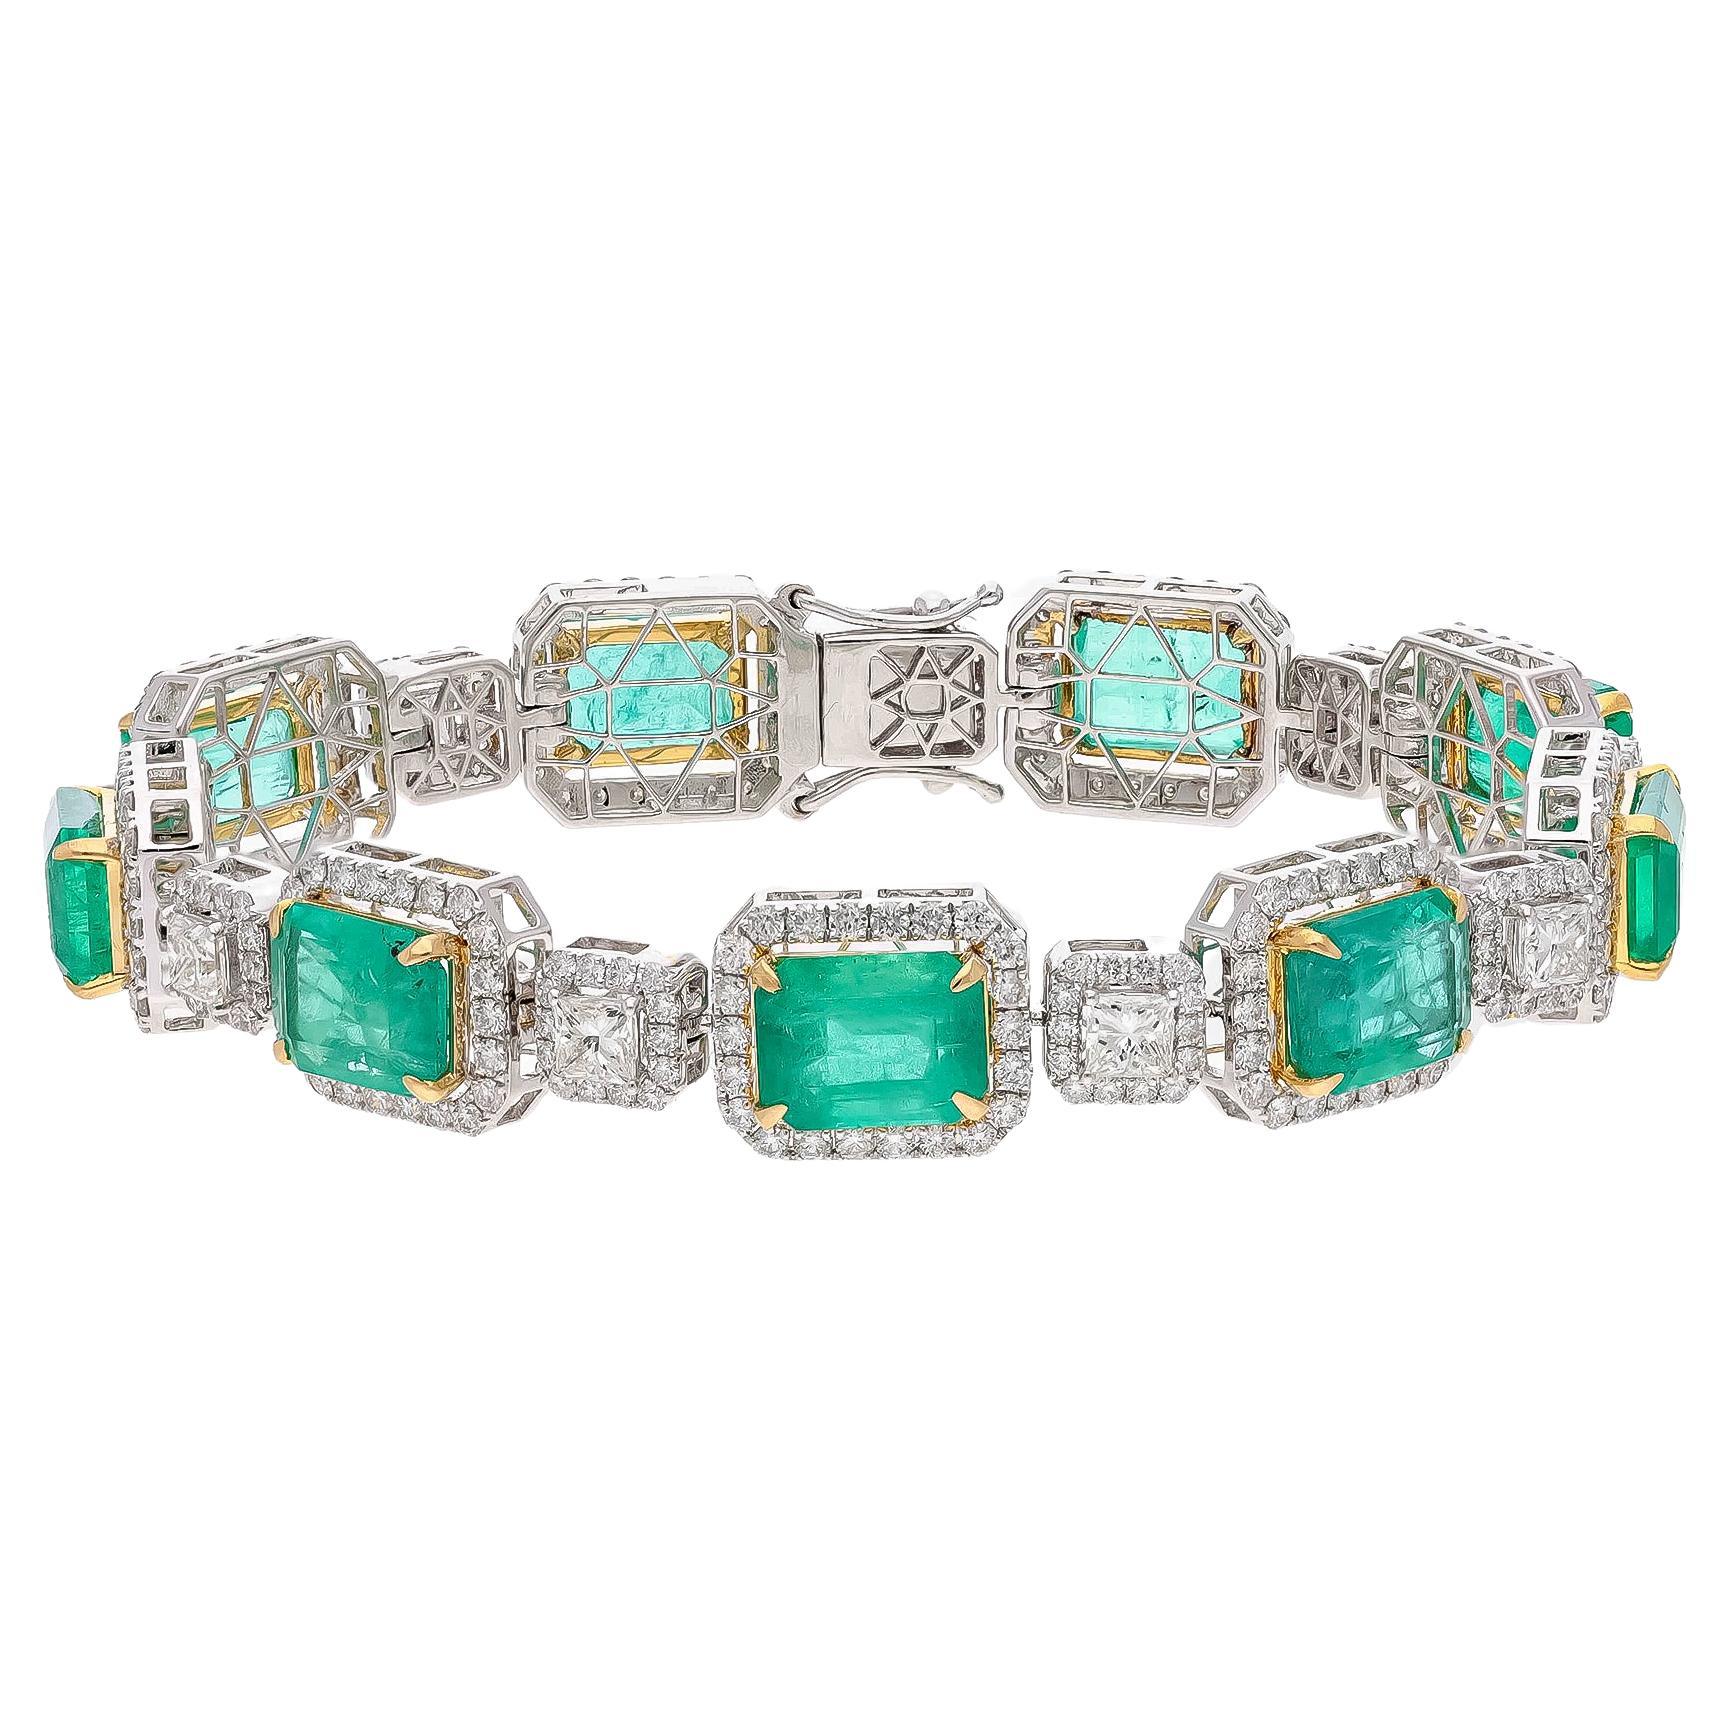 This is a stunning natural Zambian Emerald bracelet which has Emerald of very high quality and diamonds of very good quality . it has vsi clarity and G colour.

Emerald : 20.62 cts
diamonds : 5.96 cts
gold : 20.004 gms

Its very hard to capture the